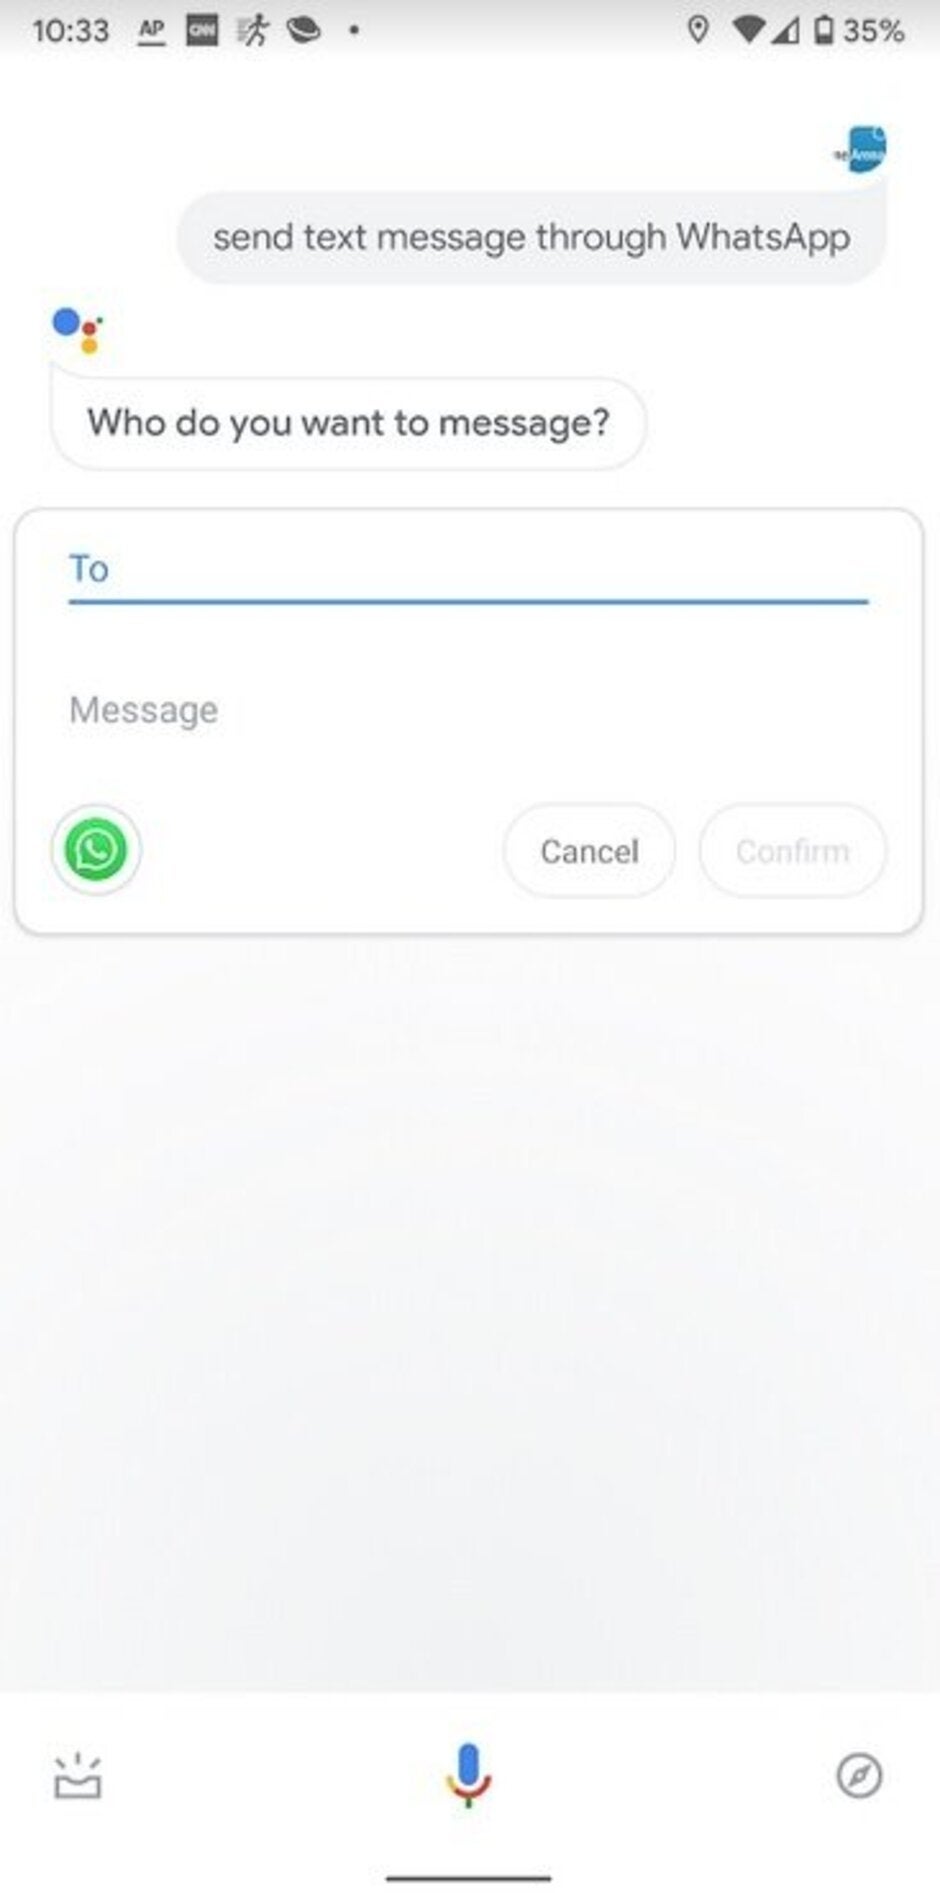 You can use Google Assistant to send encrypted text messages via WhatsApp - Google Assistant adds new WhatsApp integrations